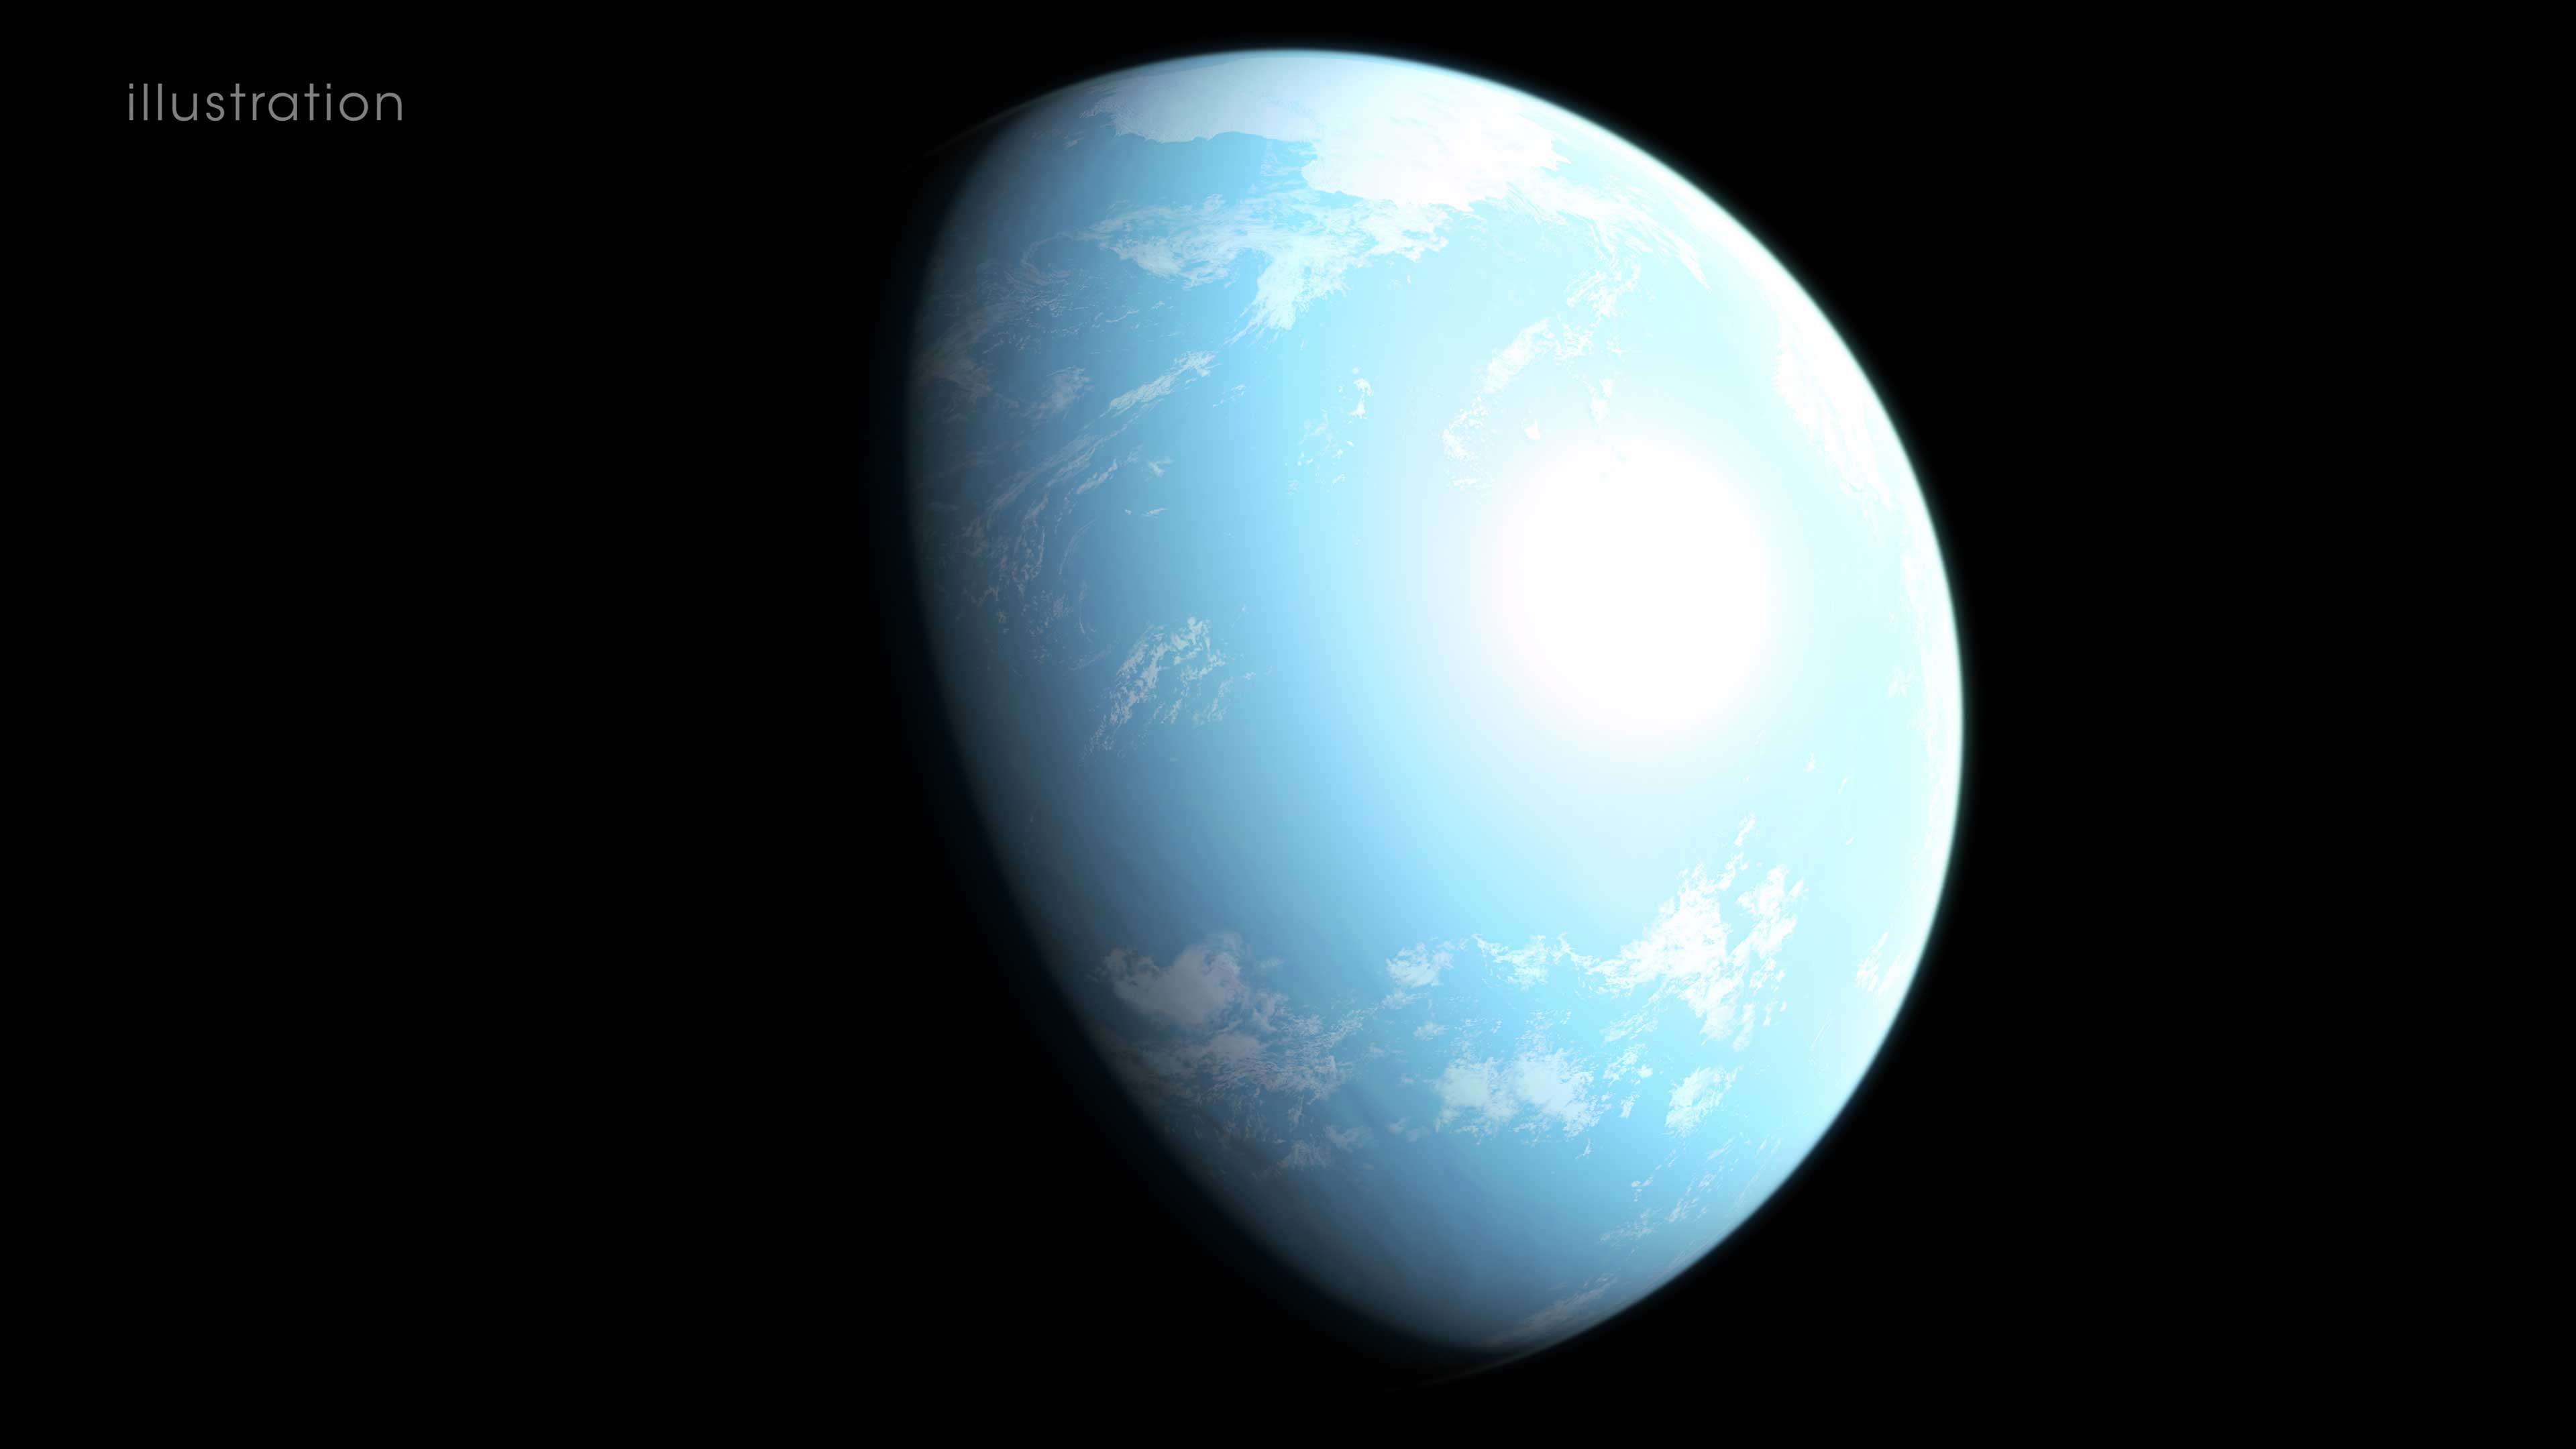 The exoplanet GJ 357 d discovered by TESS